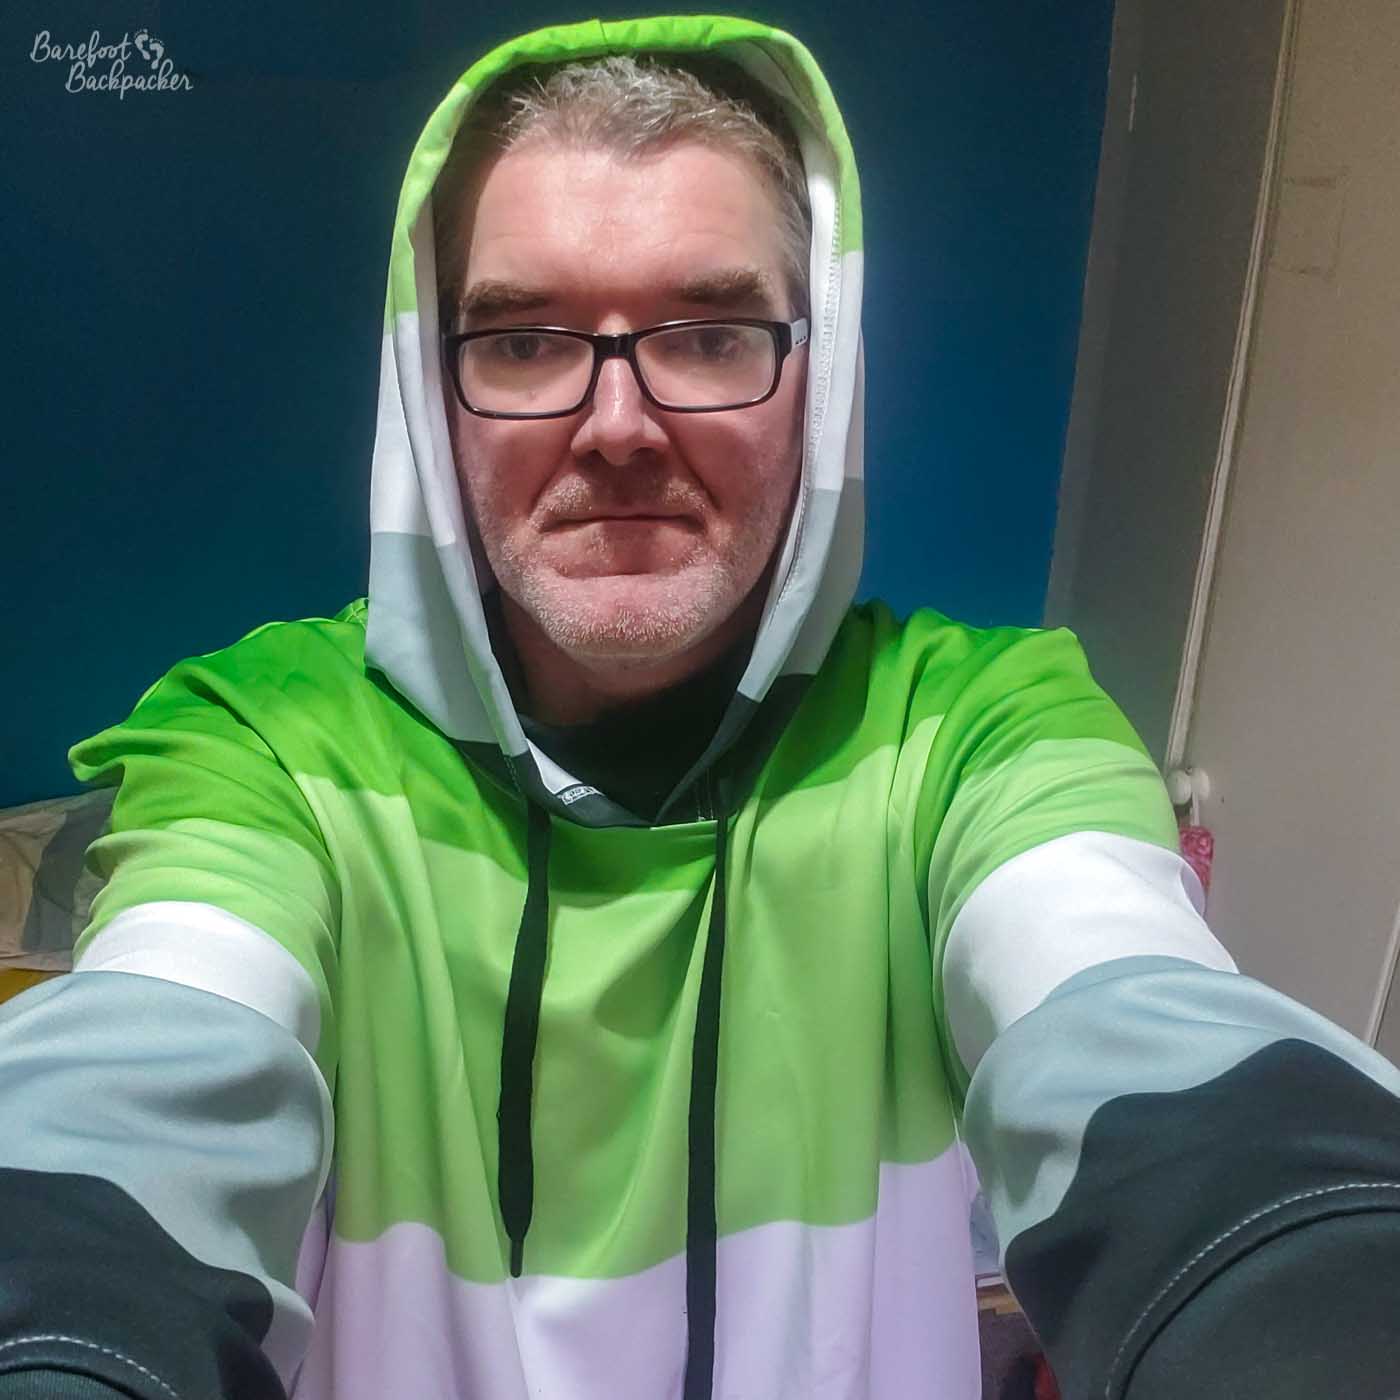 A person is sat in a room with dark walls. They are wearing a hoodie that covers their head, so only their face is visible. They are wearing glasses. The hoodie is striped in the colours of the aromantic pride flag (from top to bottom – dark green, light green, white, grey, black).